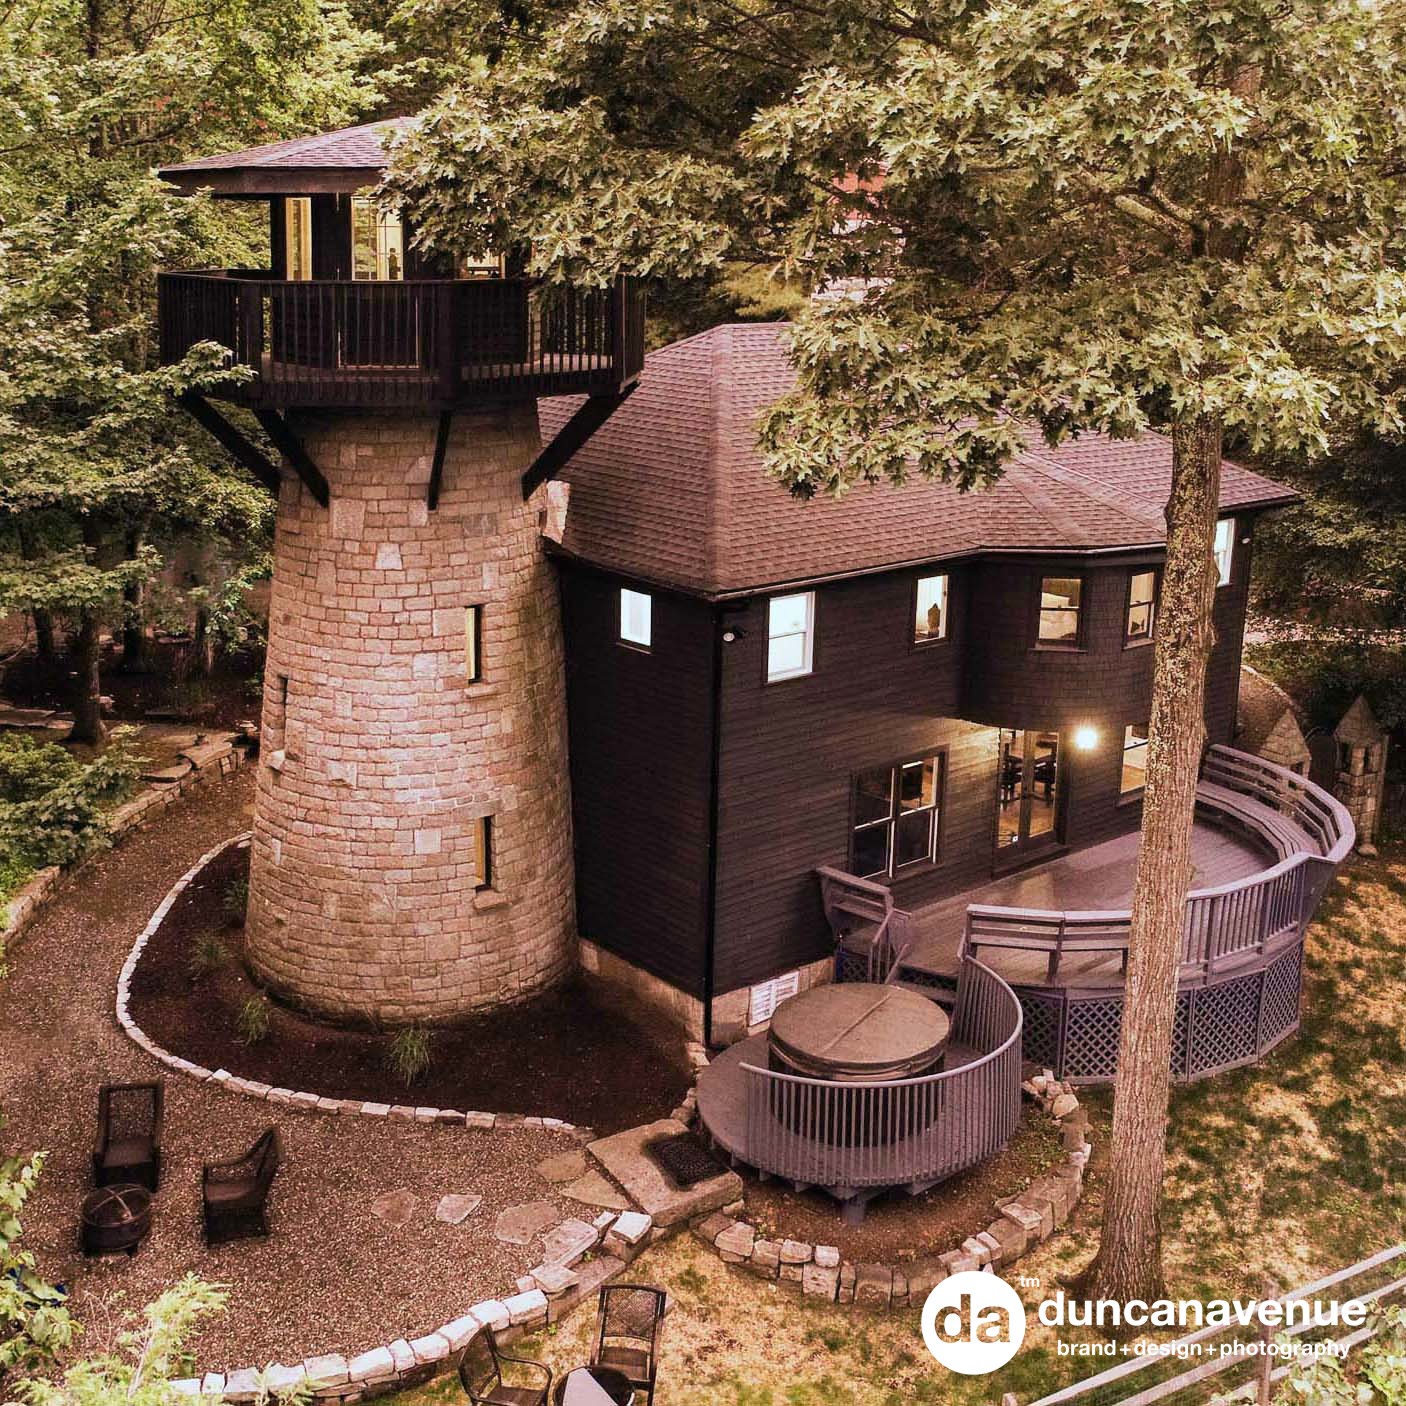 Woodstock Tower House – Photo Story by Hudson Valley Photographer Maxwell Alexander exclusively for the Hudson Valley Style Magazine